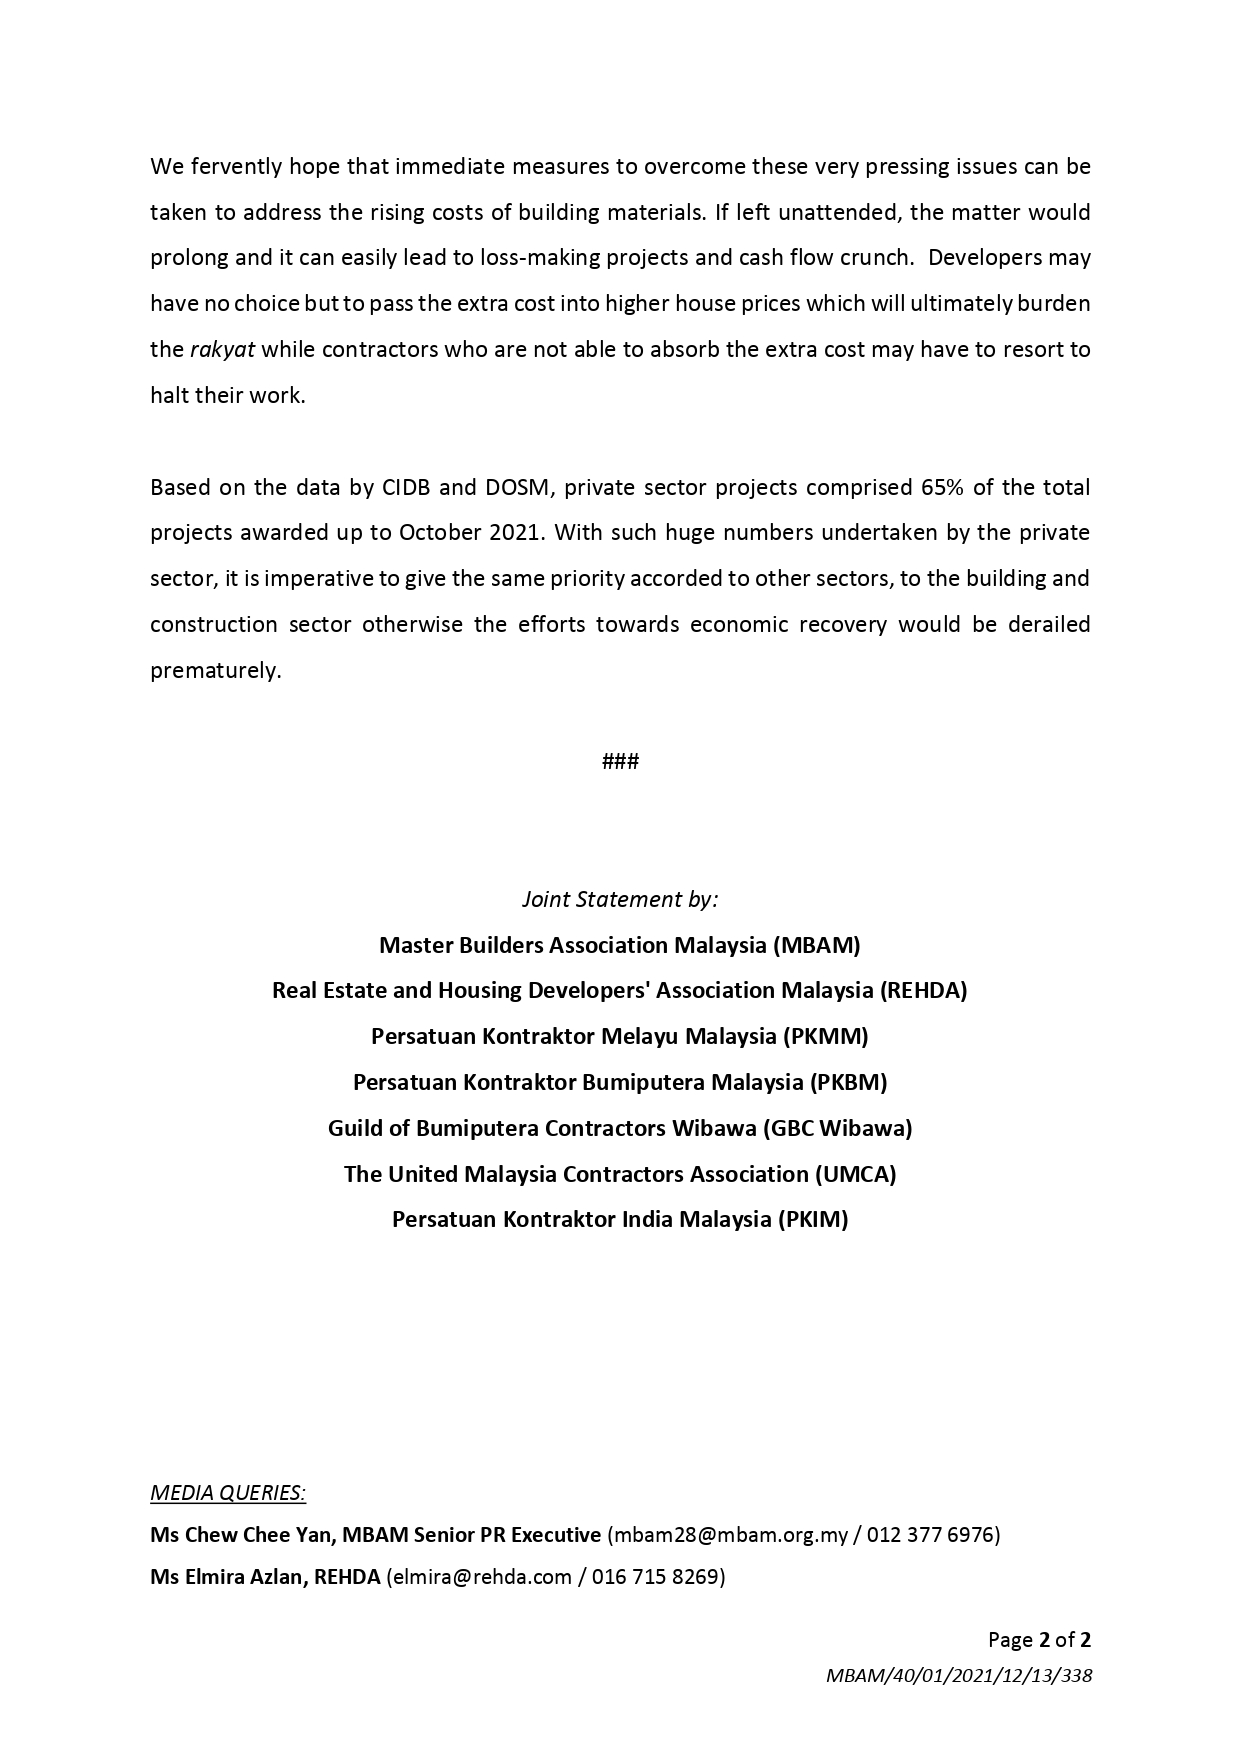 20211213_Joint_Statement-Government_to_Intervene_in_Managing_the_Increase_of_Building_Materials_Prices_page-0002